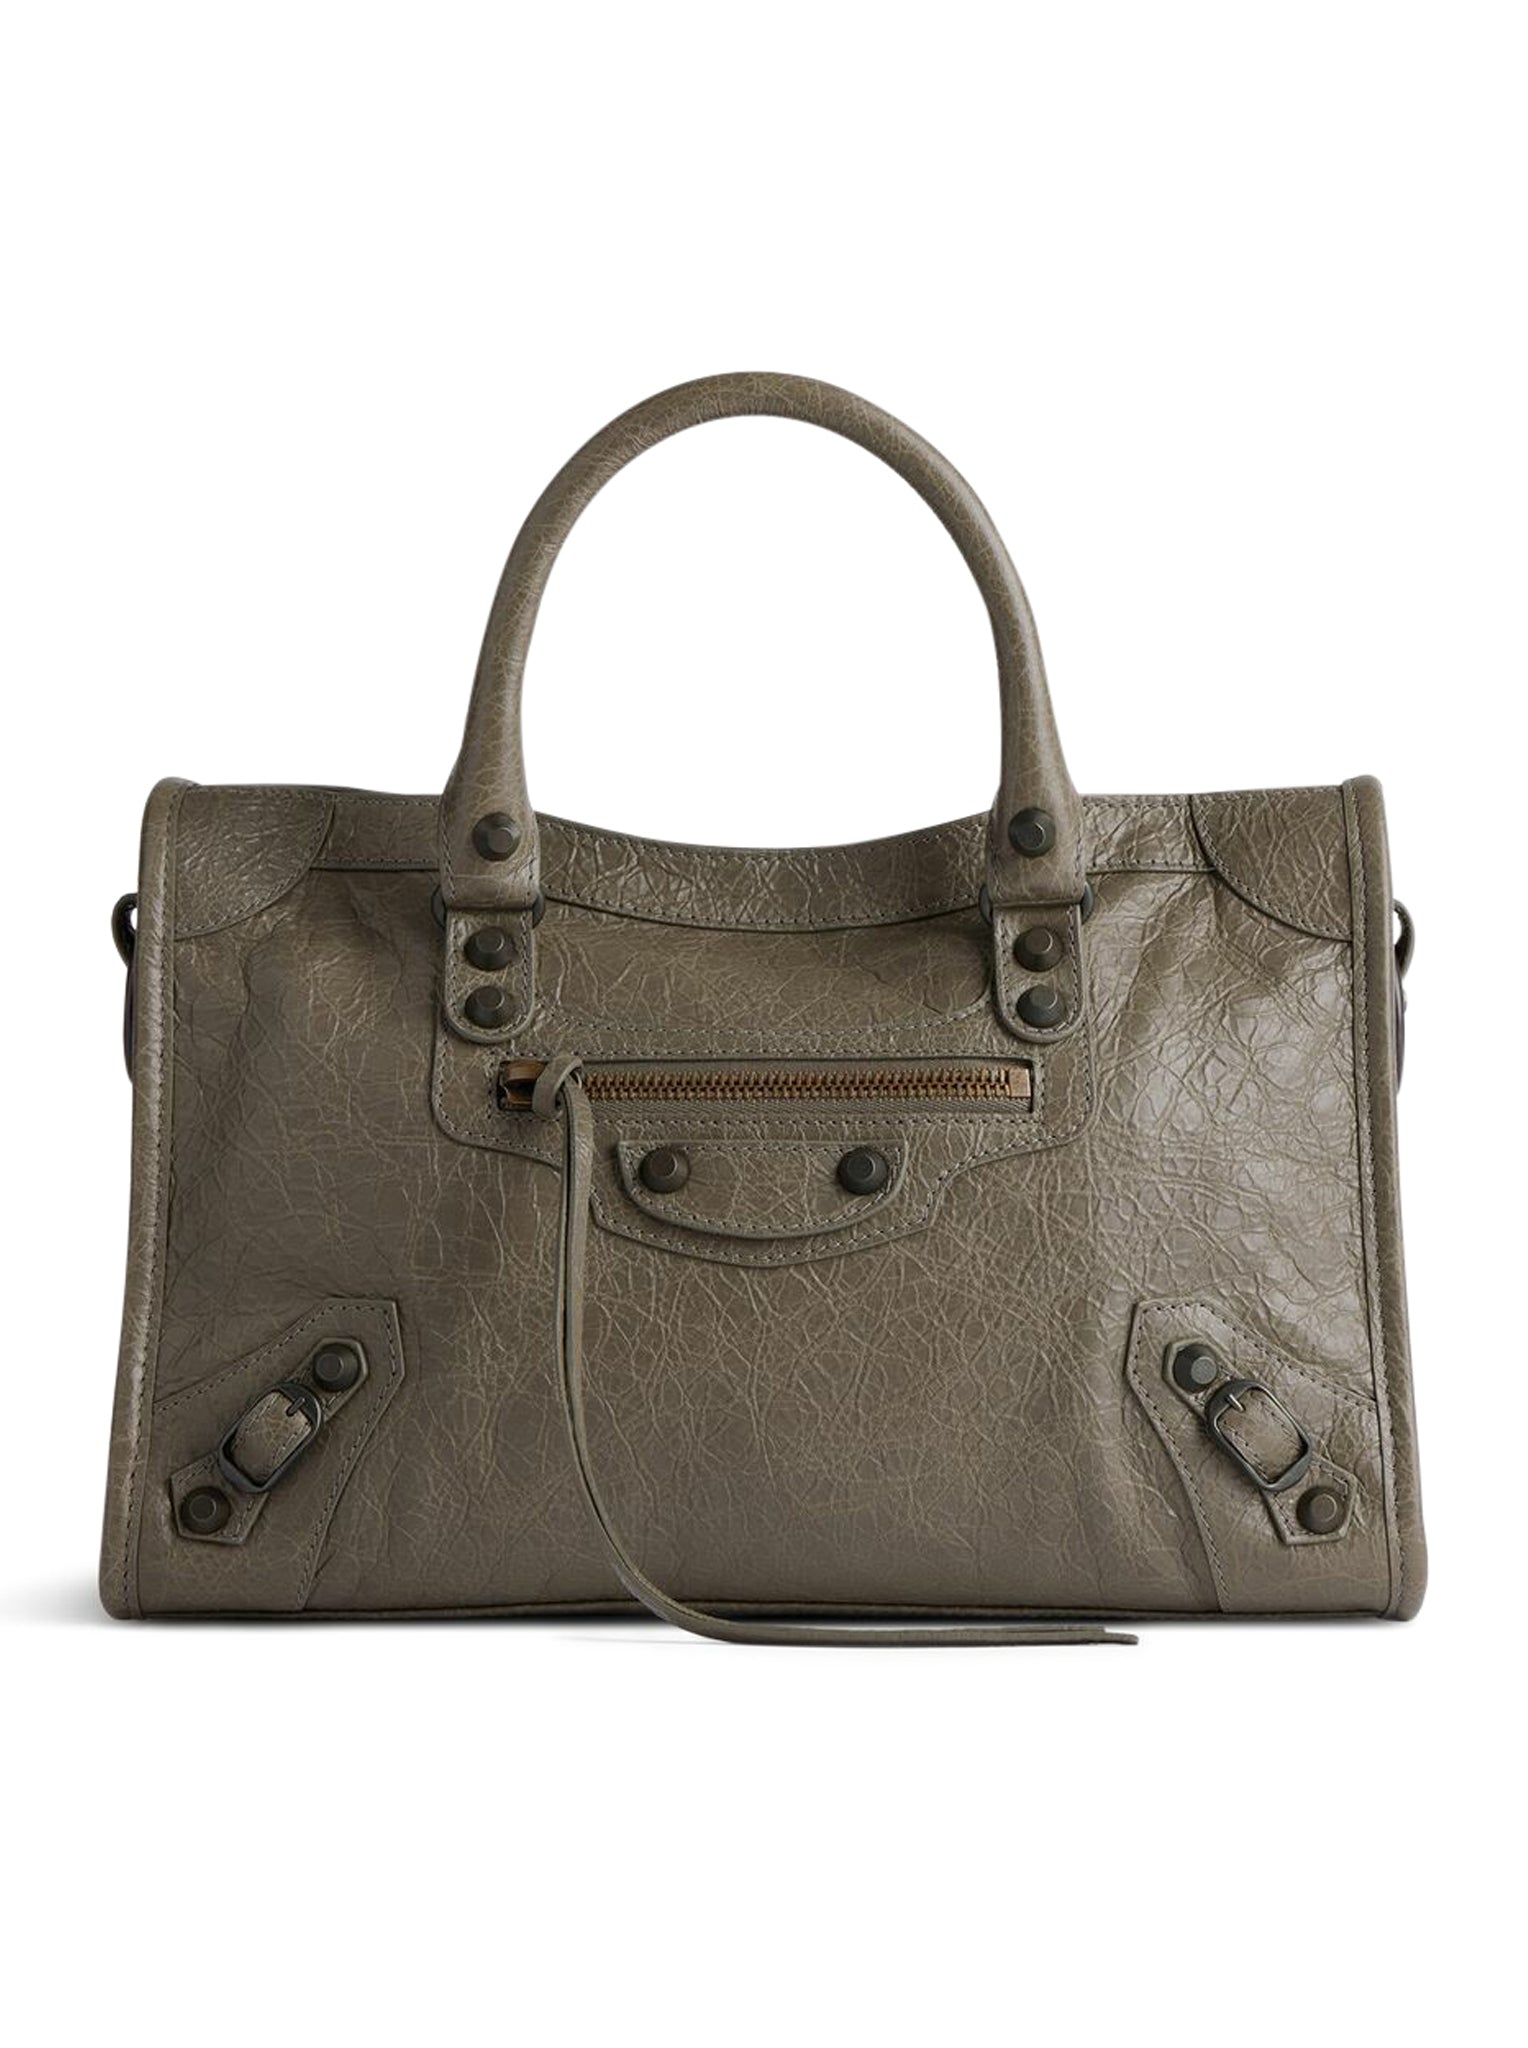 SMALL LE CITY BAG FOR WOMEN IN DARK GREEN